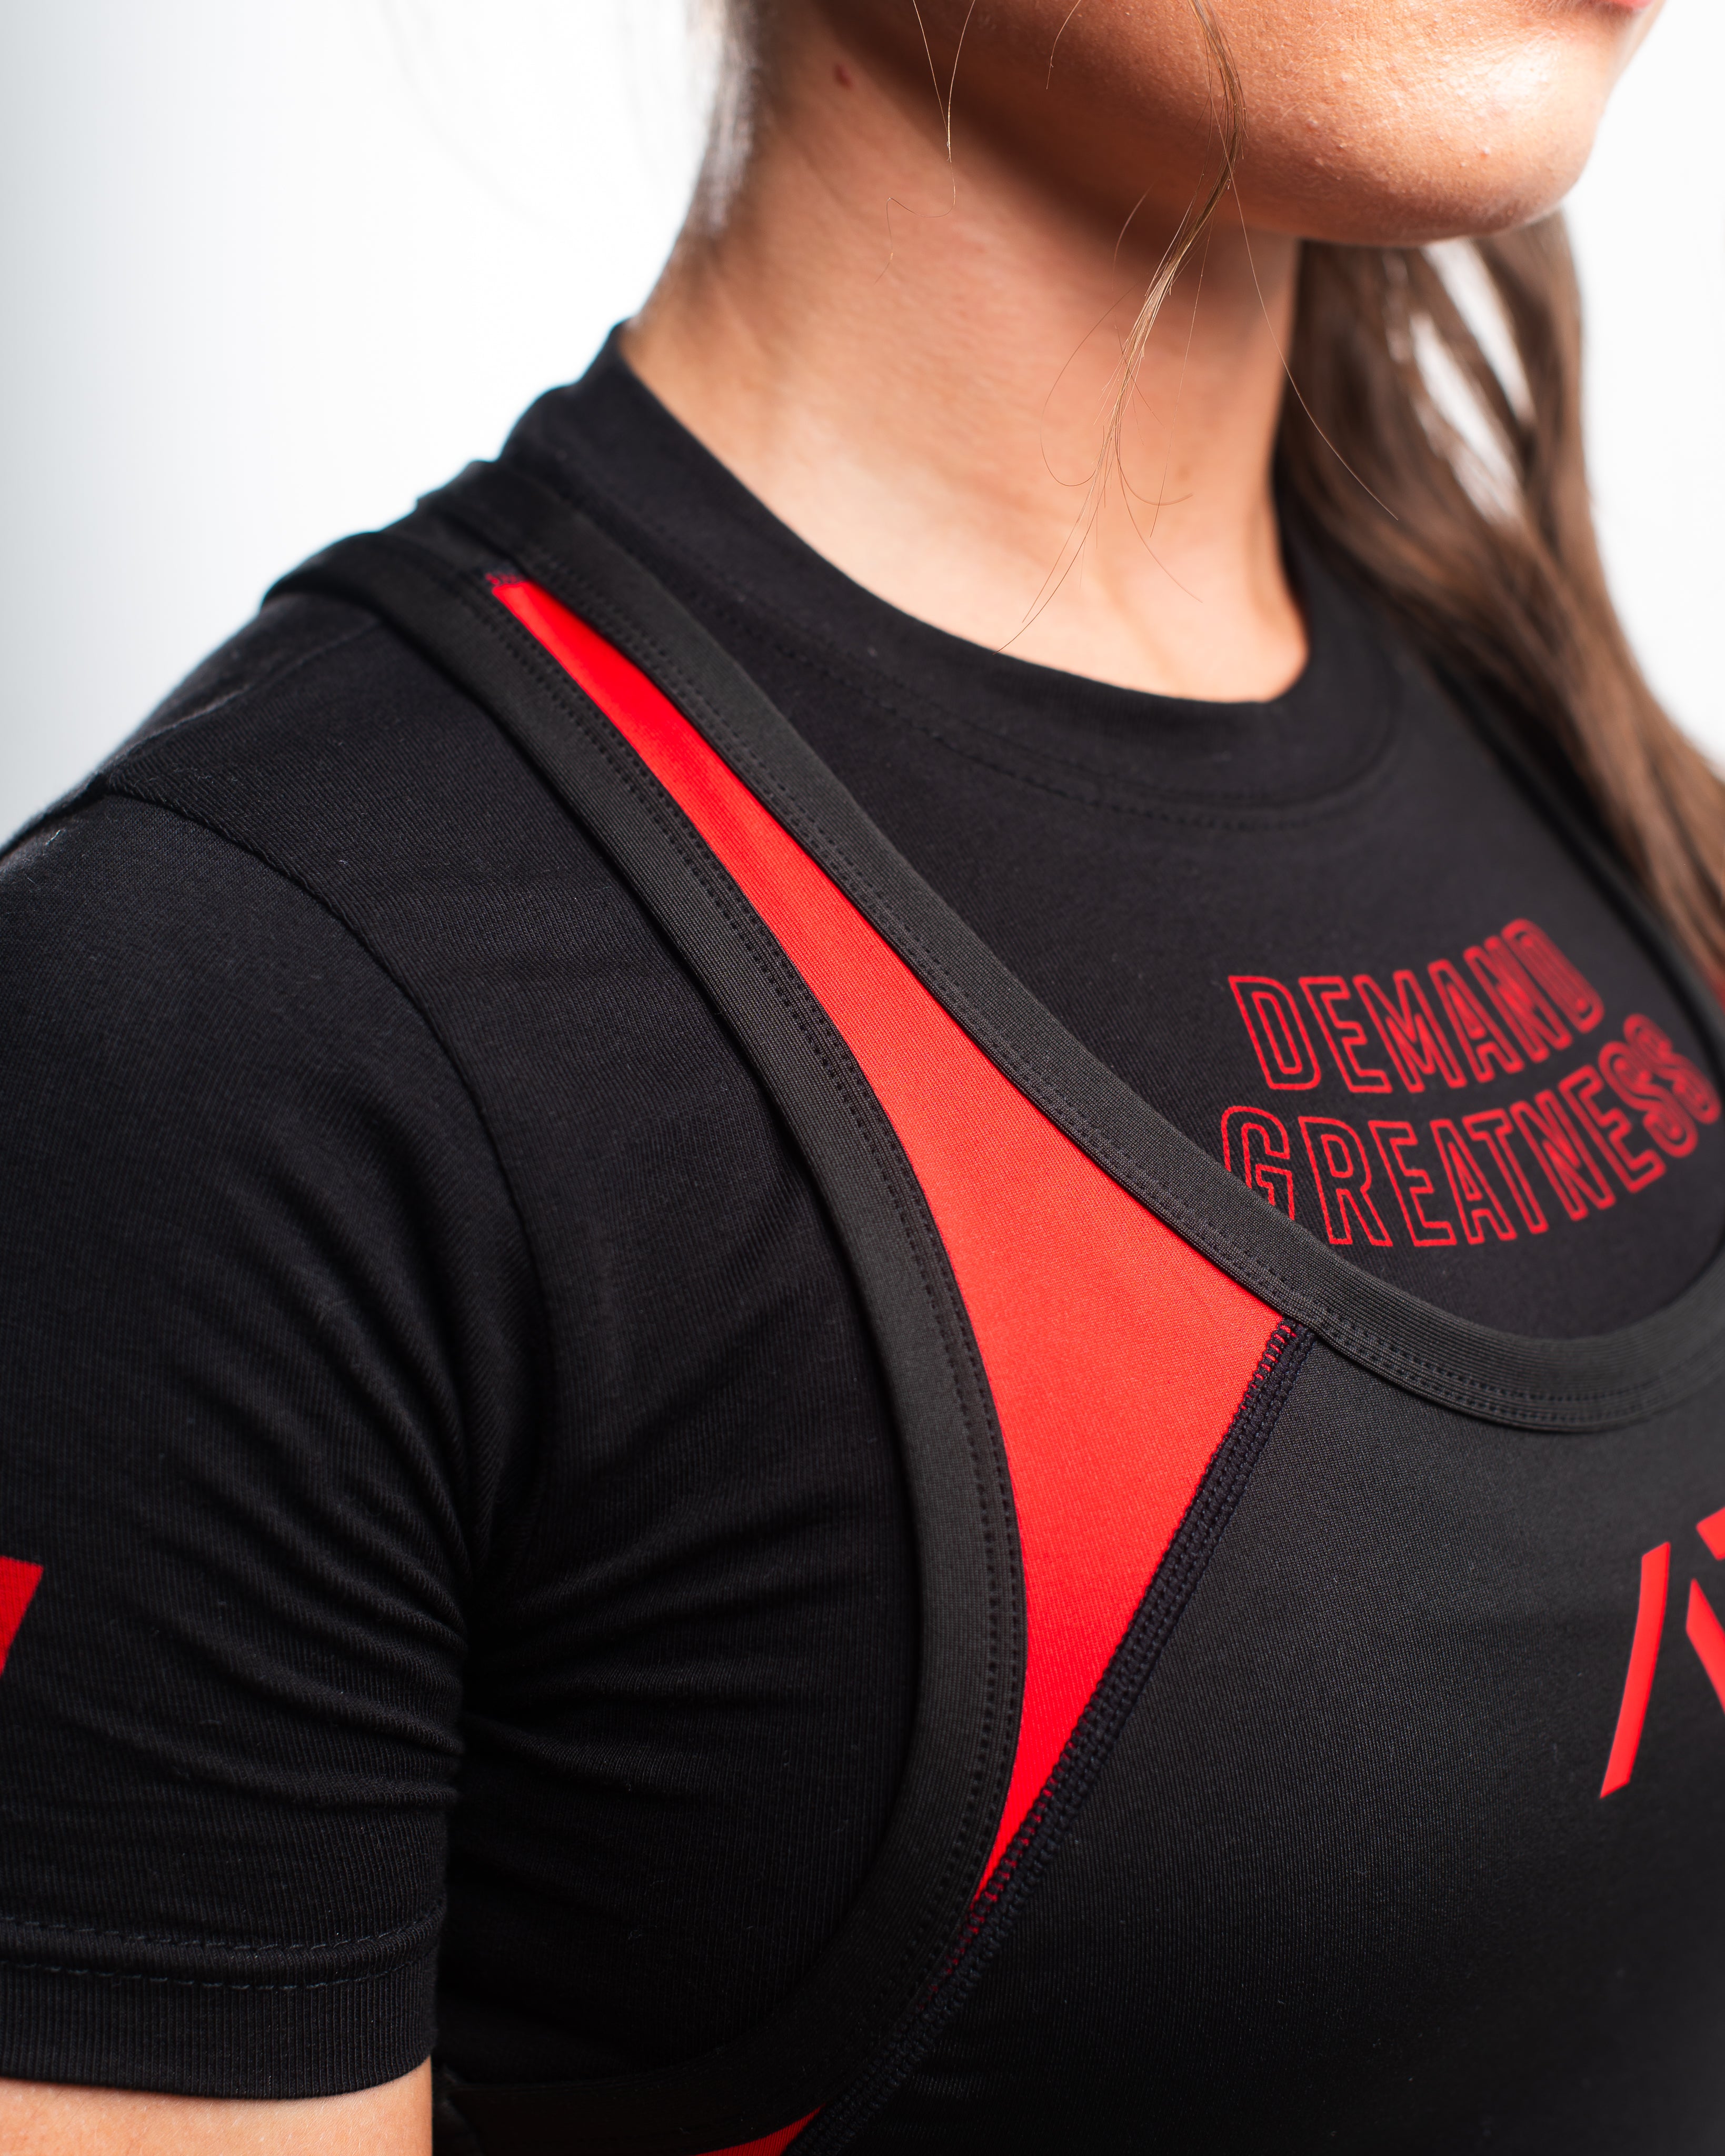 A7 IPF Approved Red Dawn Luno singlet with extra lat mobility, side panel stitching to guide the squat depth level and curved panel design for a slimming look. The Women's cut singlet features a tapered waist and additional quad room. The IPF Approved Kit includes Powerlifting Singlet, A7 Meet Shirt, A7 Zebra Wrist Wraps, A7 Deadlift Socks, Hourglass Knee Sleeves (Stiff Knee Sleeves and Rigor Mortis Knee Sleeves). Genouillères powerlifting shipping to France, Spain, Ireland, Germany, Italy, Sweden and EU.